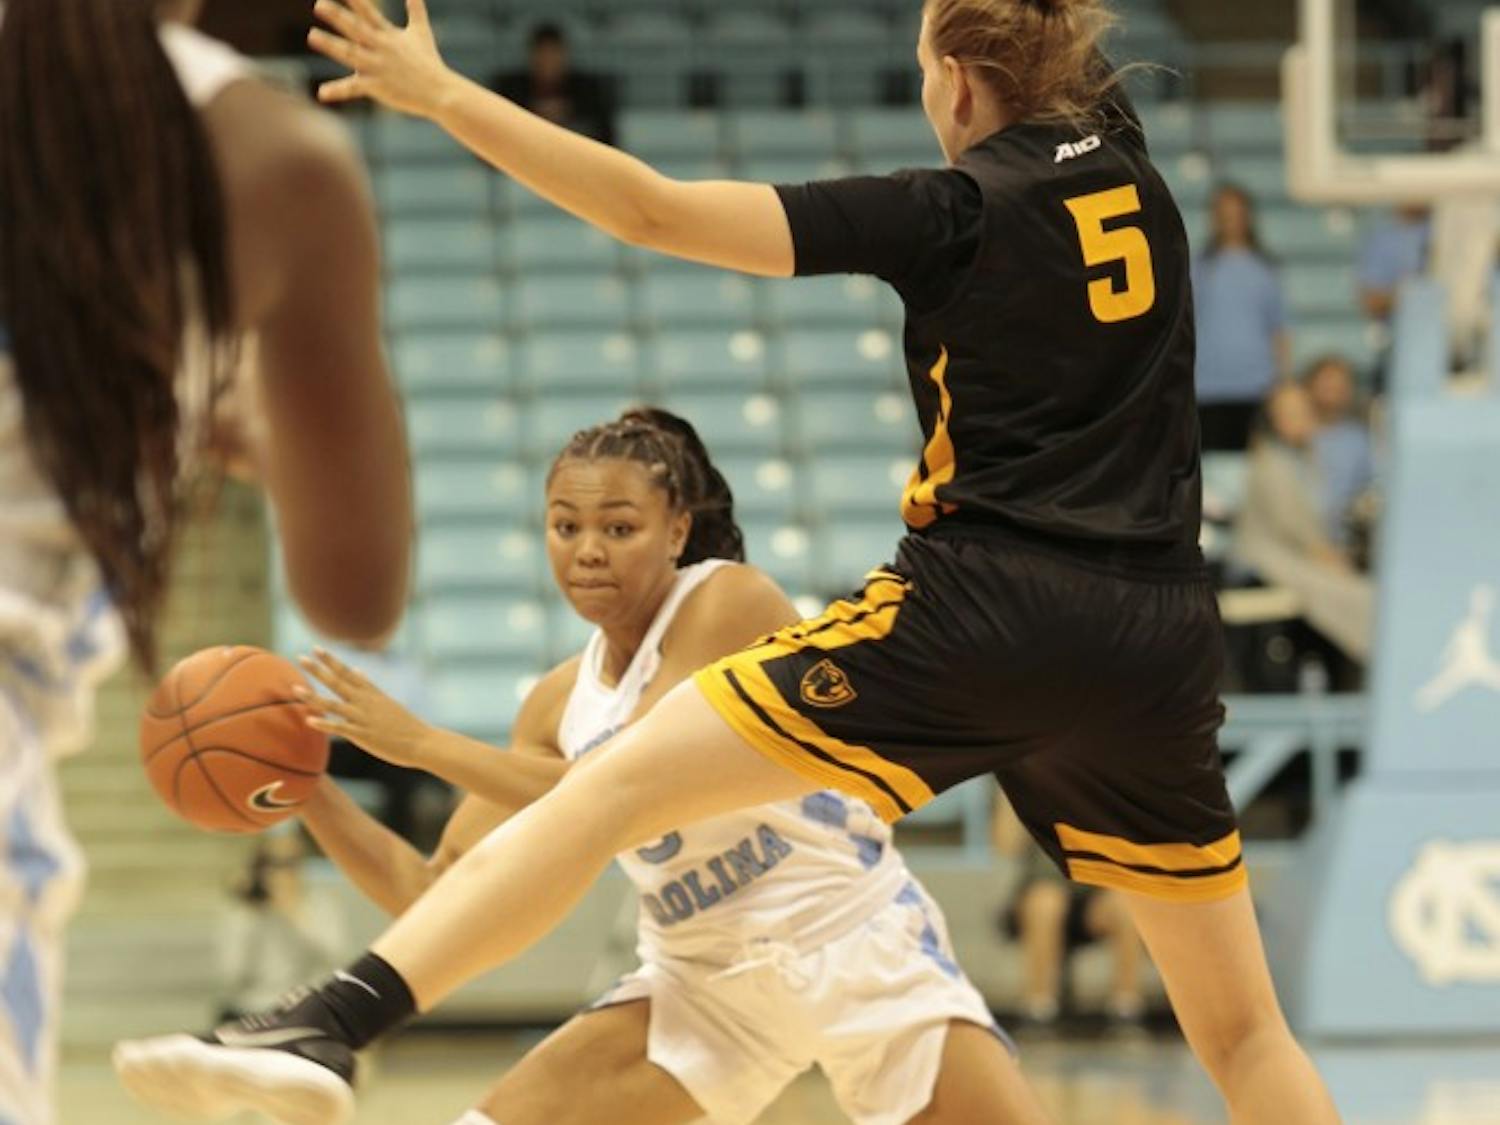 Junior guard Stephanie Watts (5) passes the ball during Wednesday's game against Virginia Commonwealth University at Carmichael Arena. UNC won 59-47.